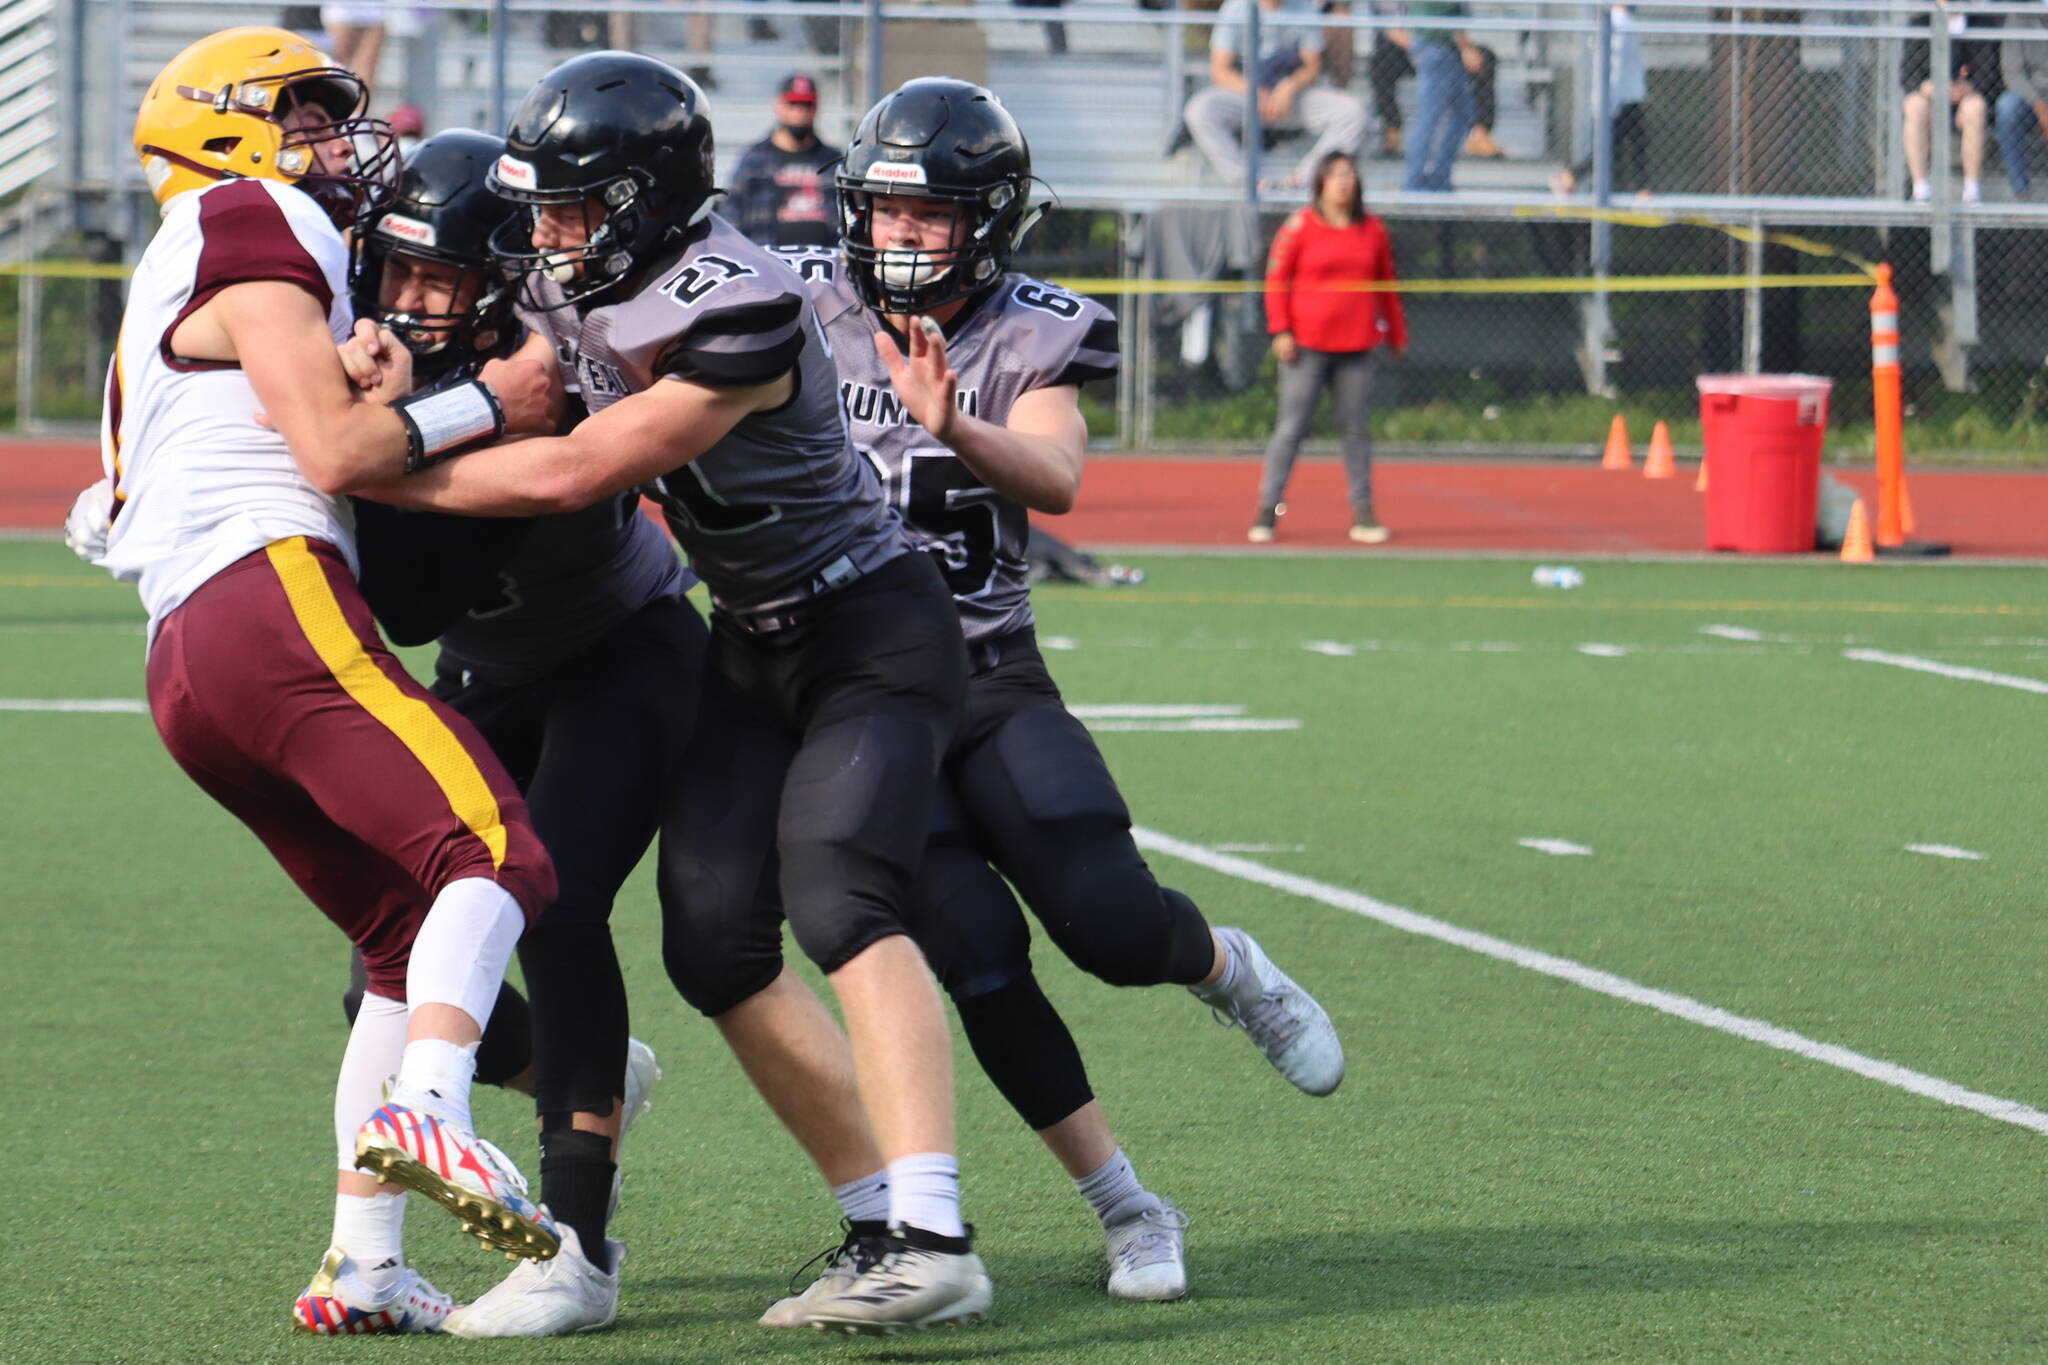 Lucas White (21) and two other Huskies take down a player from Dimond High School on Saturday, Aug. 21. Juneau coach Rich Sjoroos said solid tackling by White and others played a major role in the Huskie's 27-14 win against Bartlett High School. (Ben Hohenstatt / Juneau Empire File)